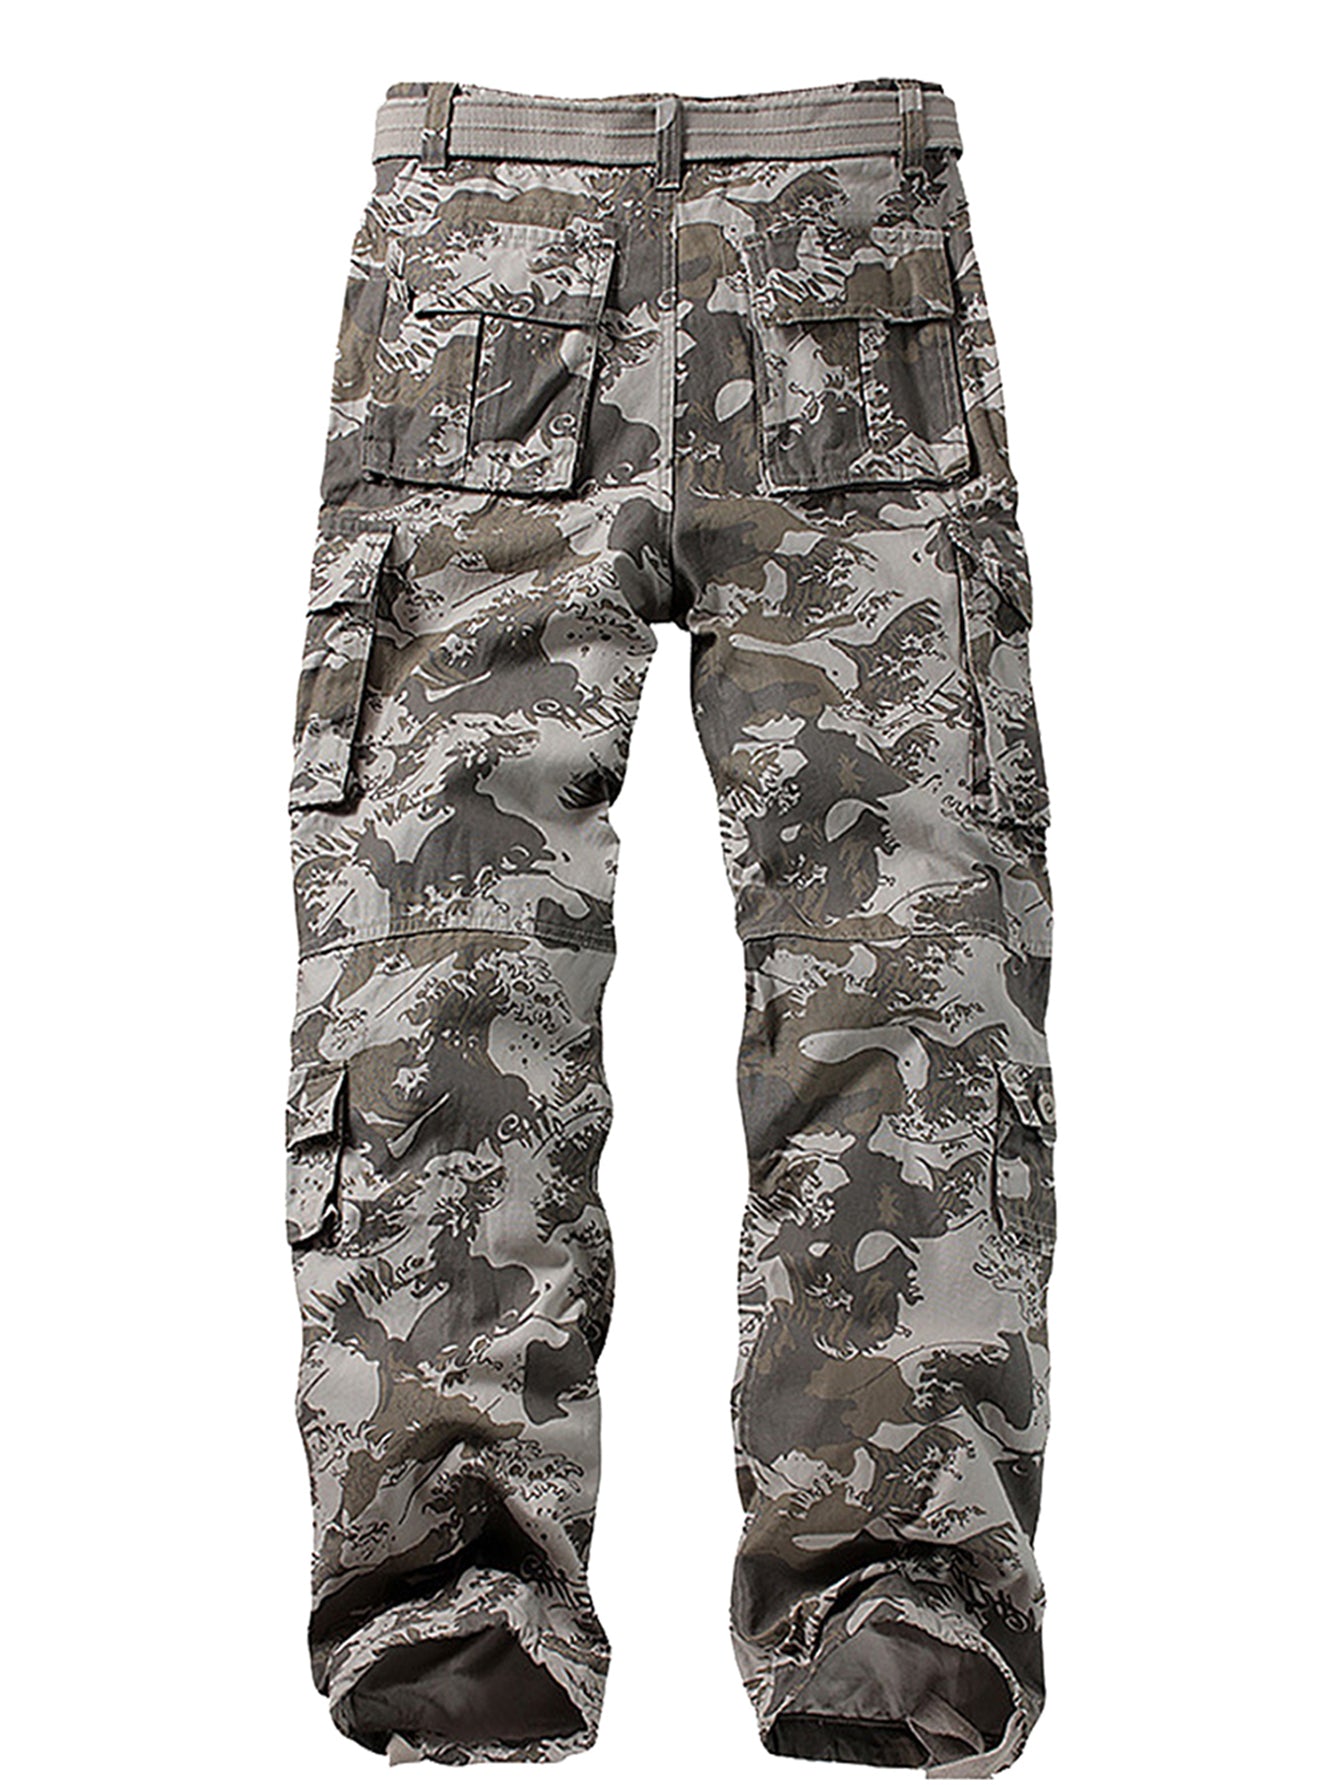 Men's Relaxed Fit Cargo Pants with Multi Pockets Outdoor Work Pants 38 -  Walmart.com